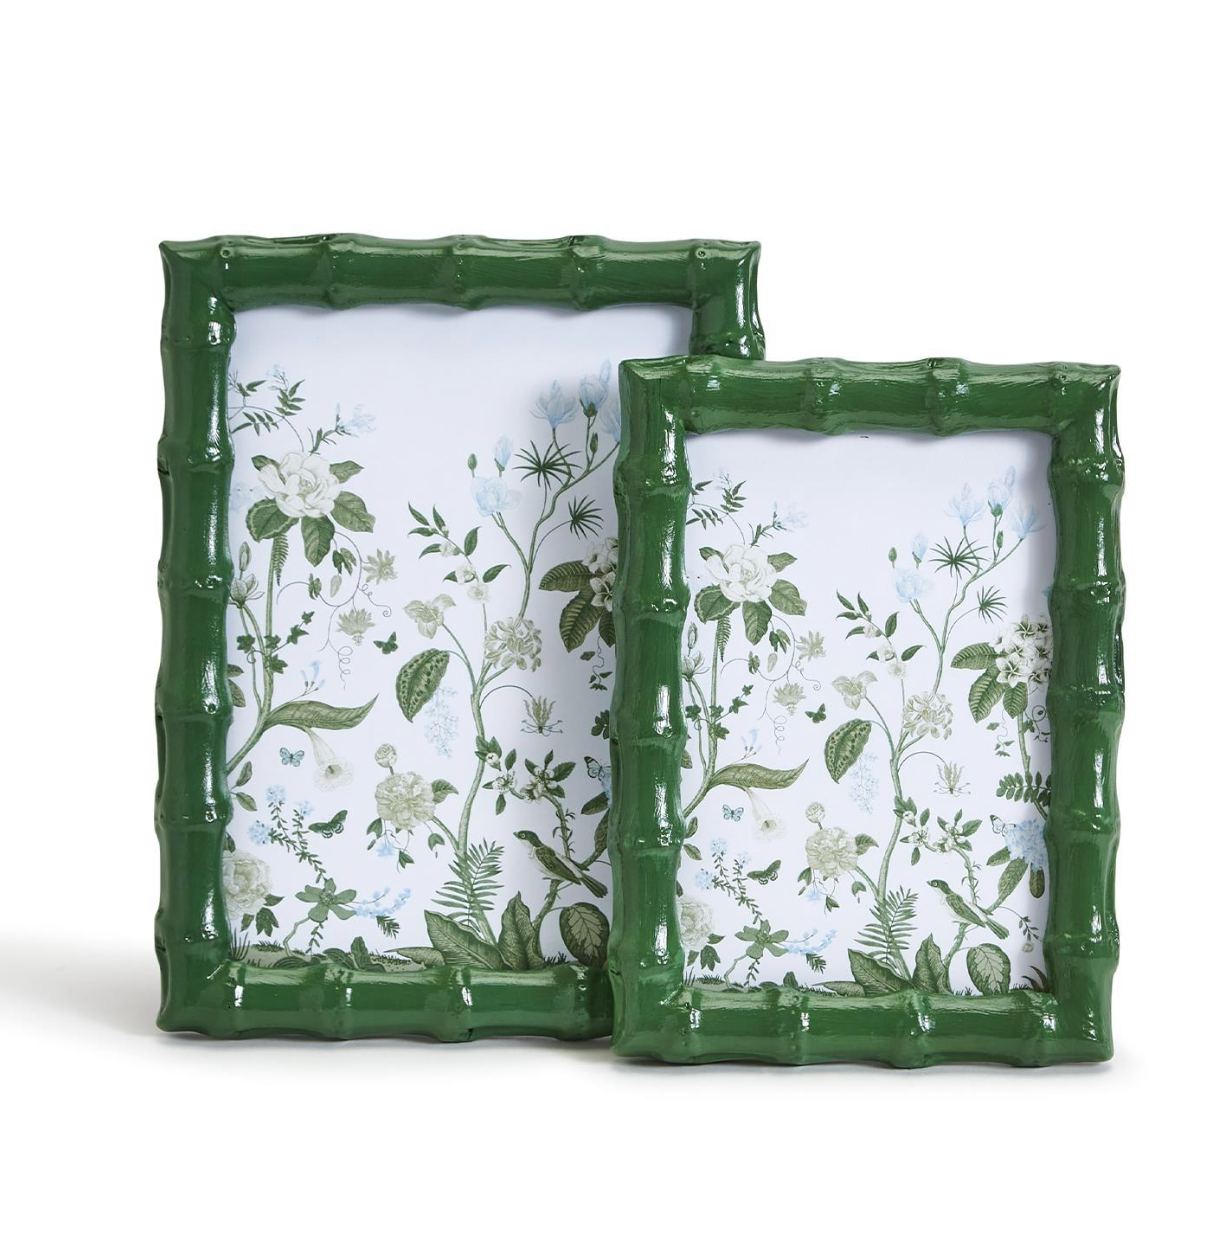 Countryside Green Photo Frame - Curated Home Decor